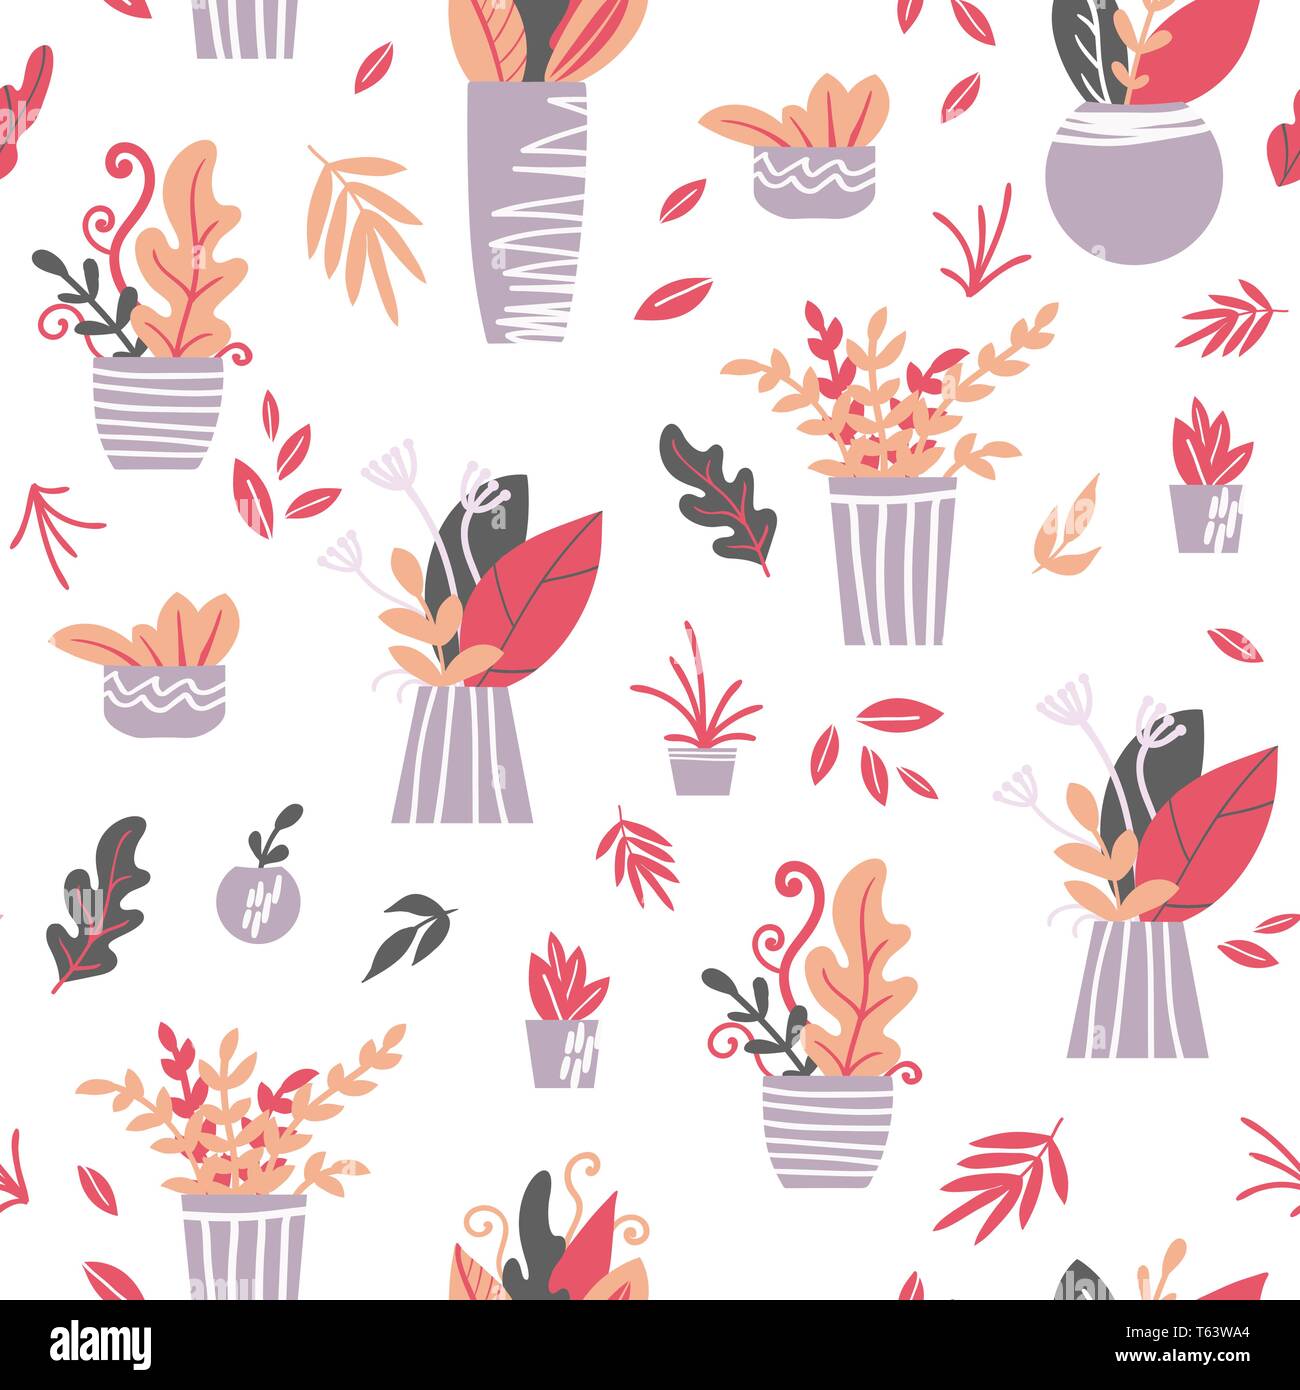 Hand drawn seamless pattern. House plants growing in pots on white background. Vector illustration. Textile, fabric, wrapping paper design. Stock Vector